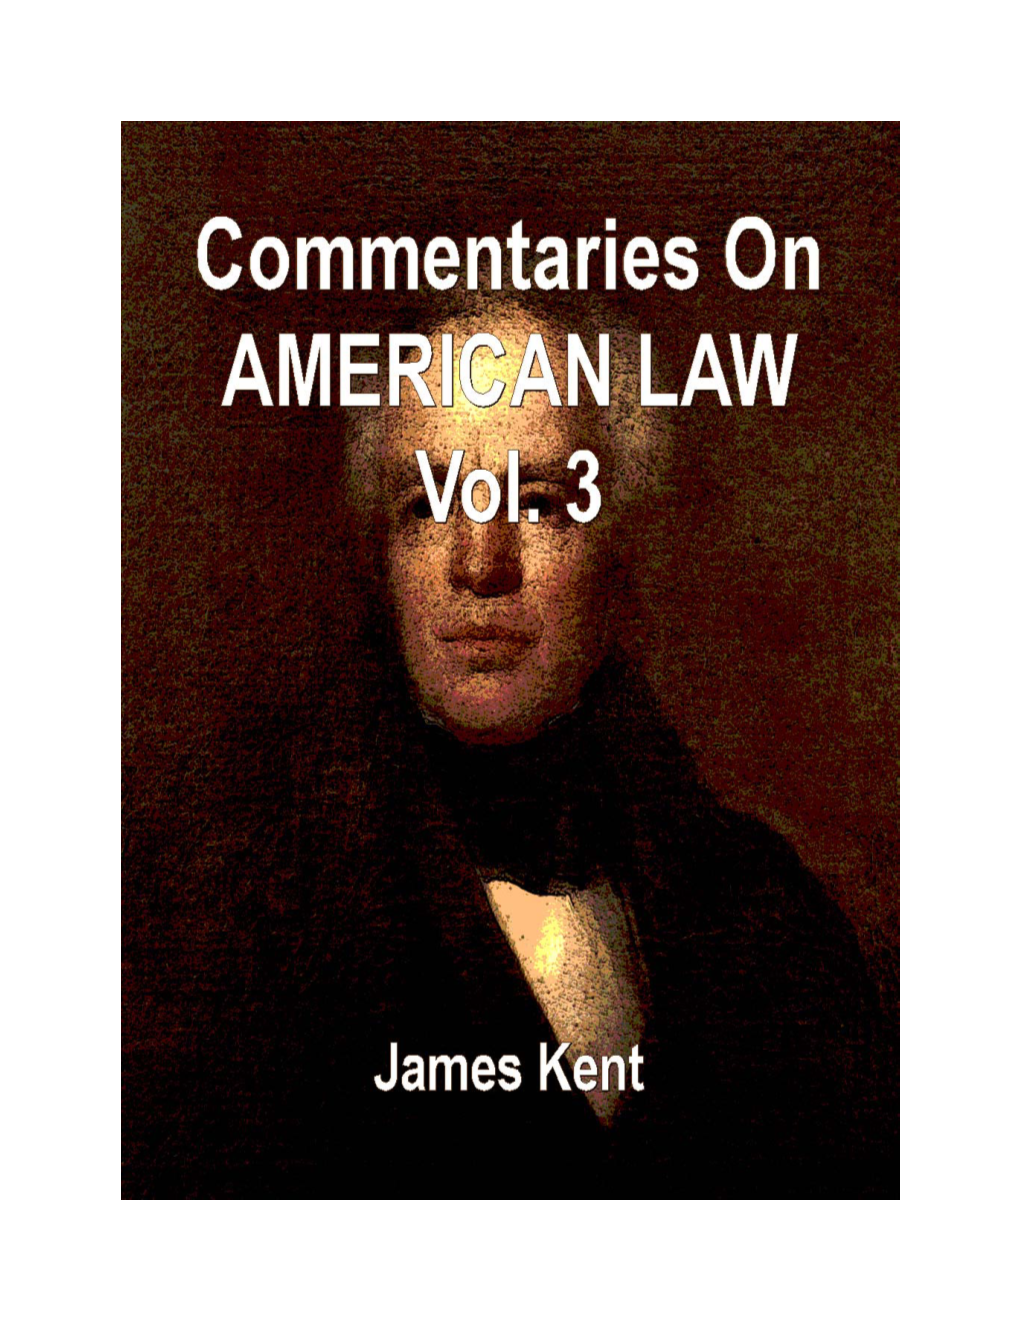 Commentaries on American Law, Vol. 3